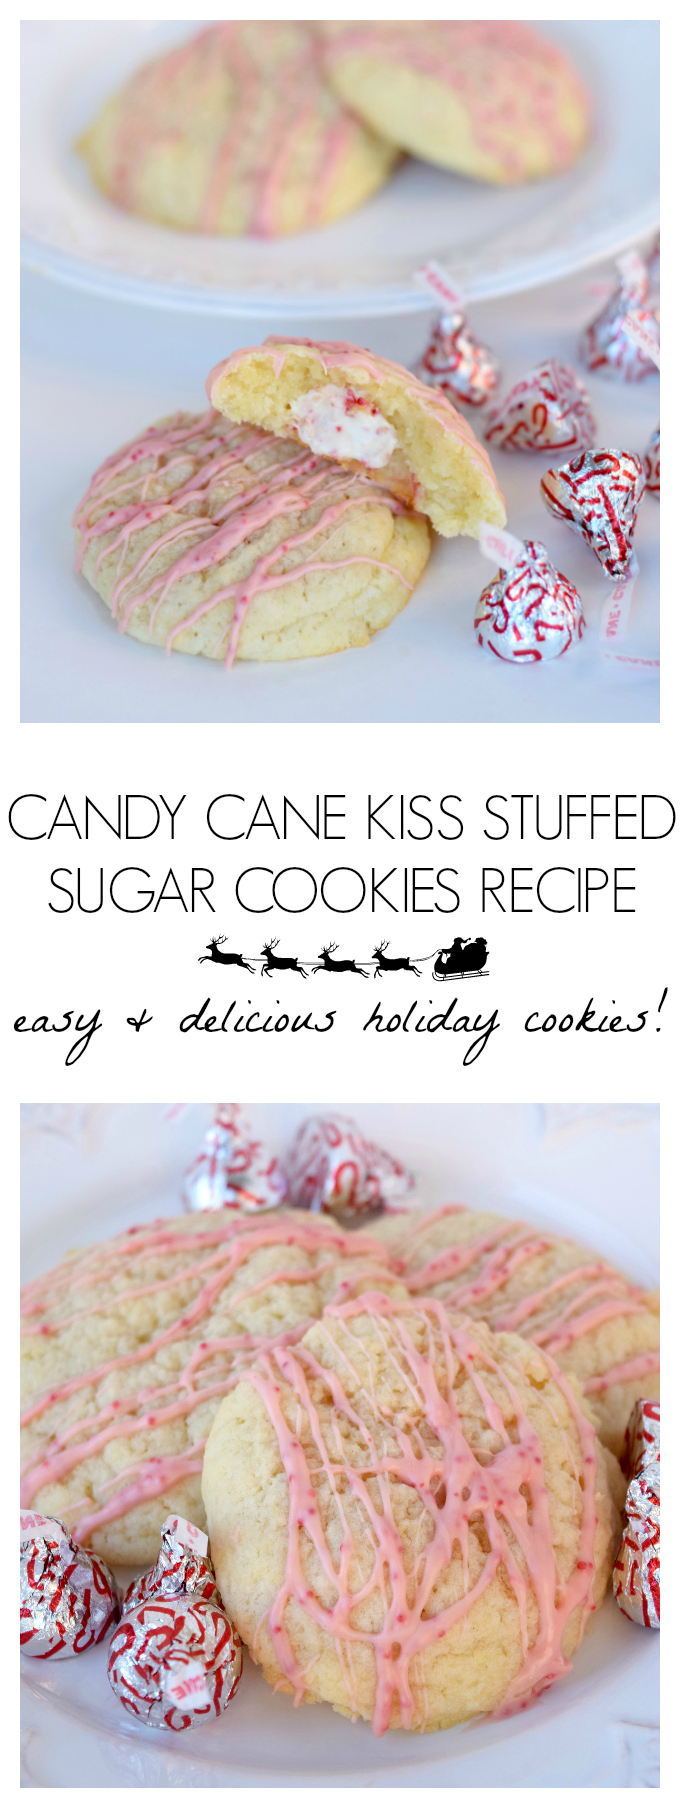 PERFECT HOLIDAY COOKIES CANDY CANE KISS STUFFED SUGAR COOKIES RECIPE